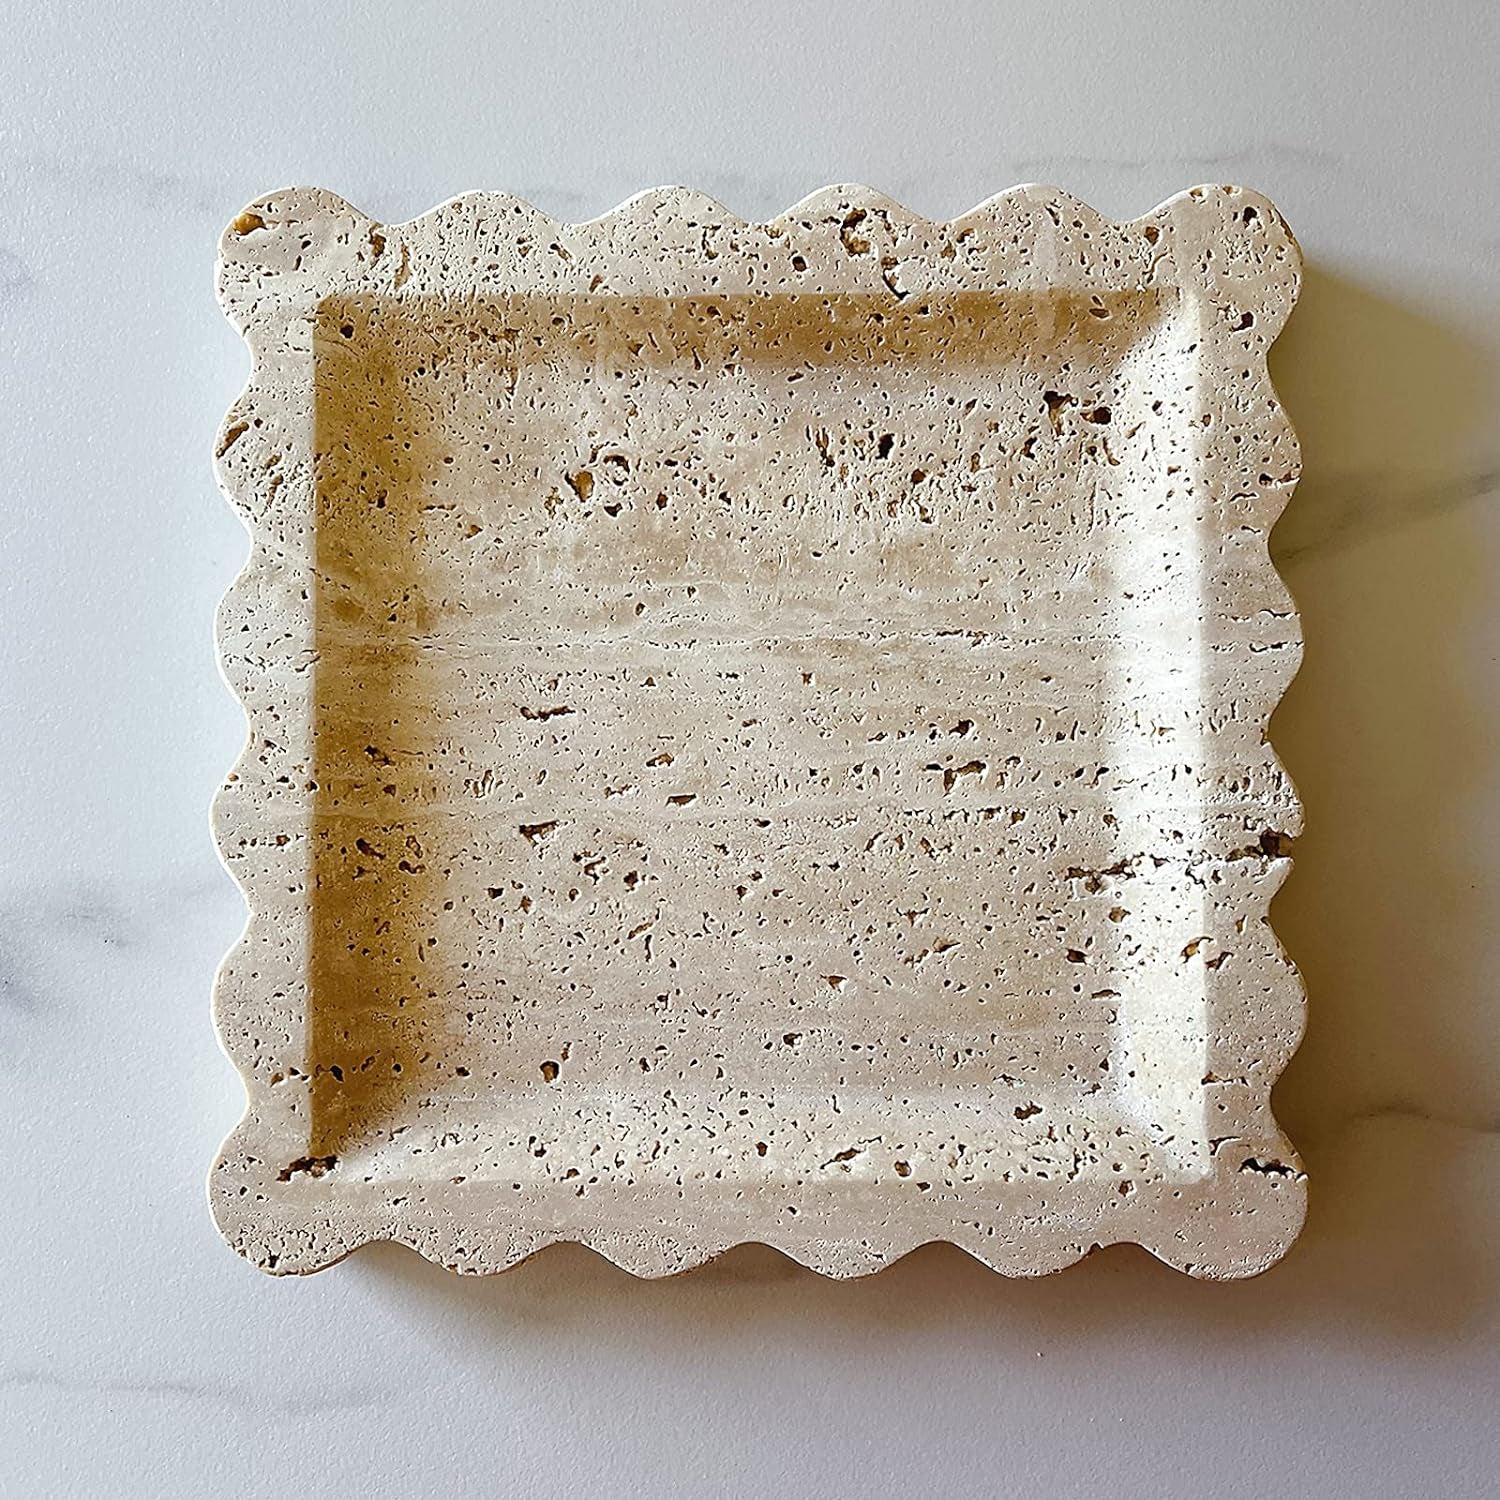 Vintage Natural Marble Tray Small Ornaments Scalloped Tray Handmade Storage Dish for Counter, Vanity, Dresser, Nightstand and Desk (Beige Travertine)